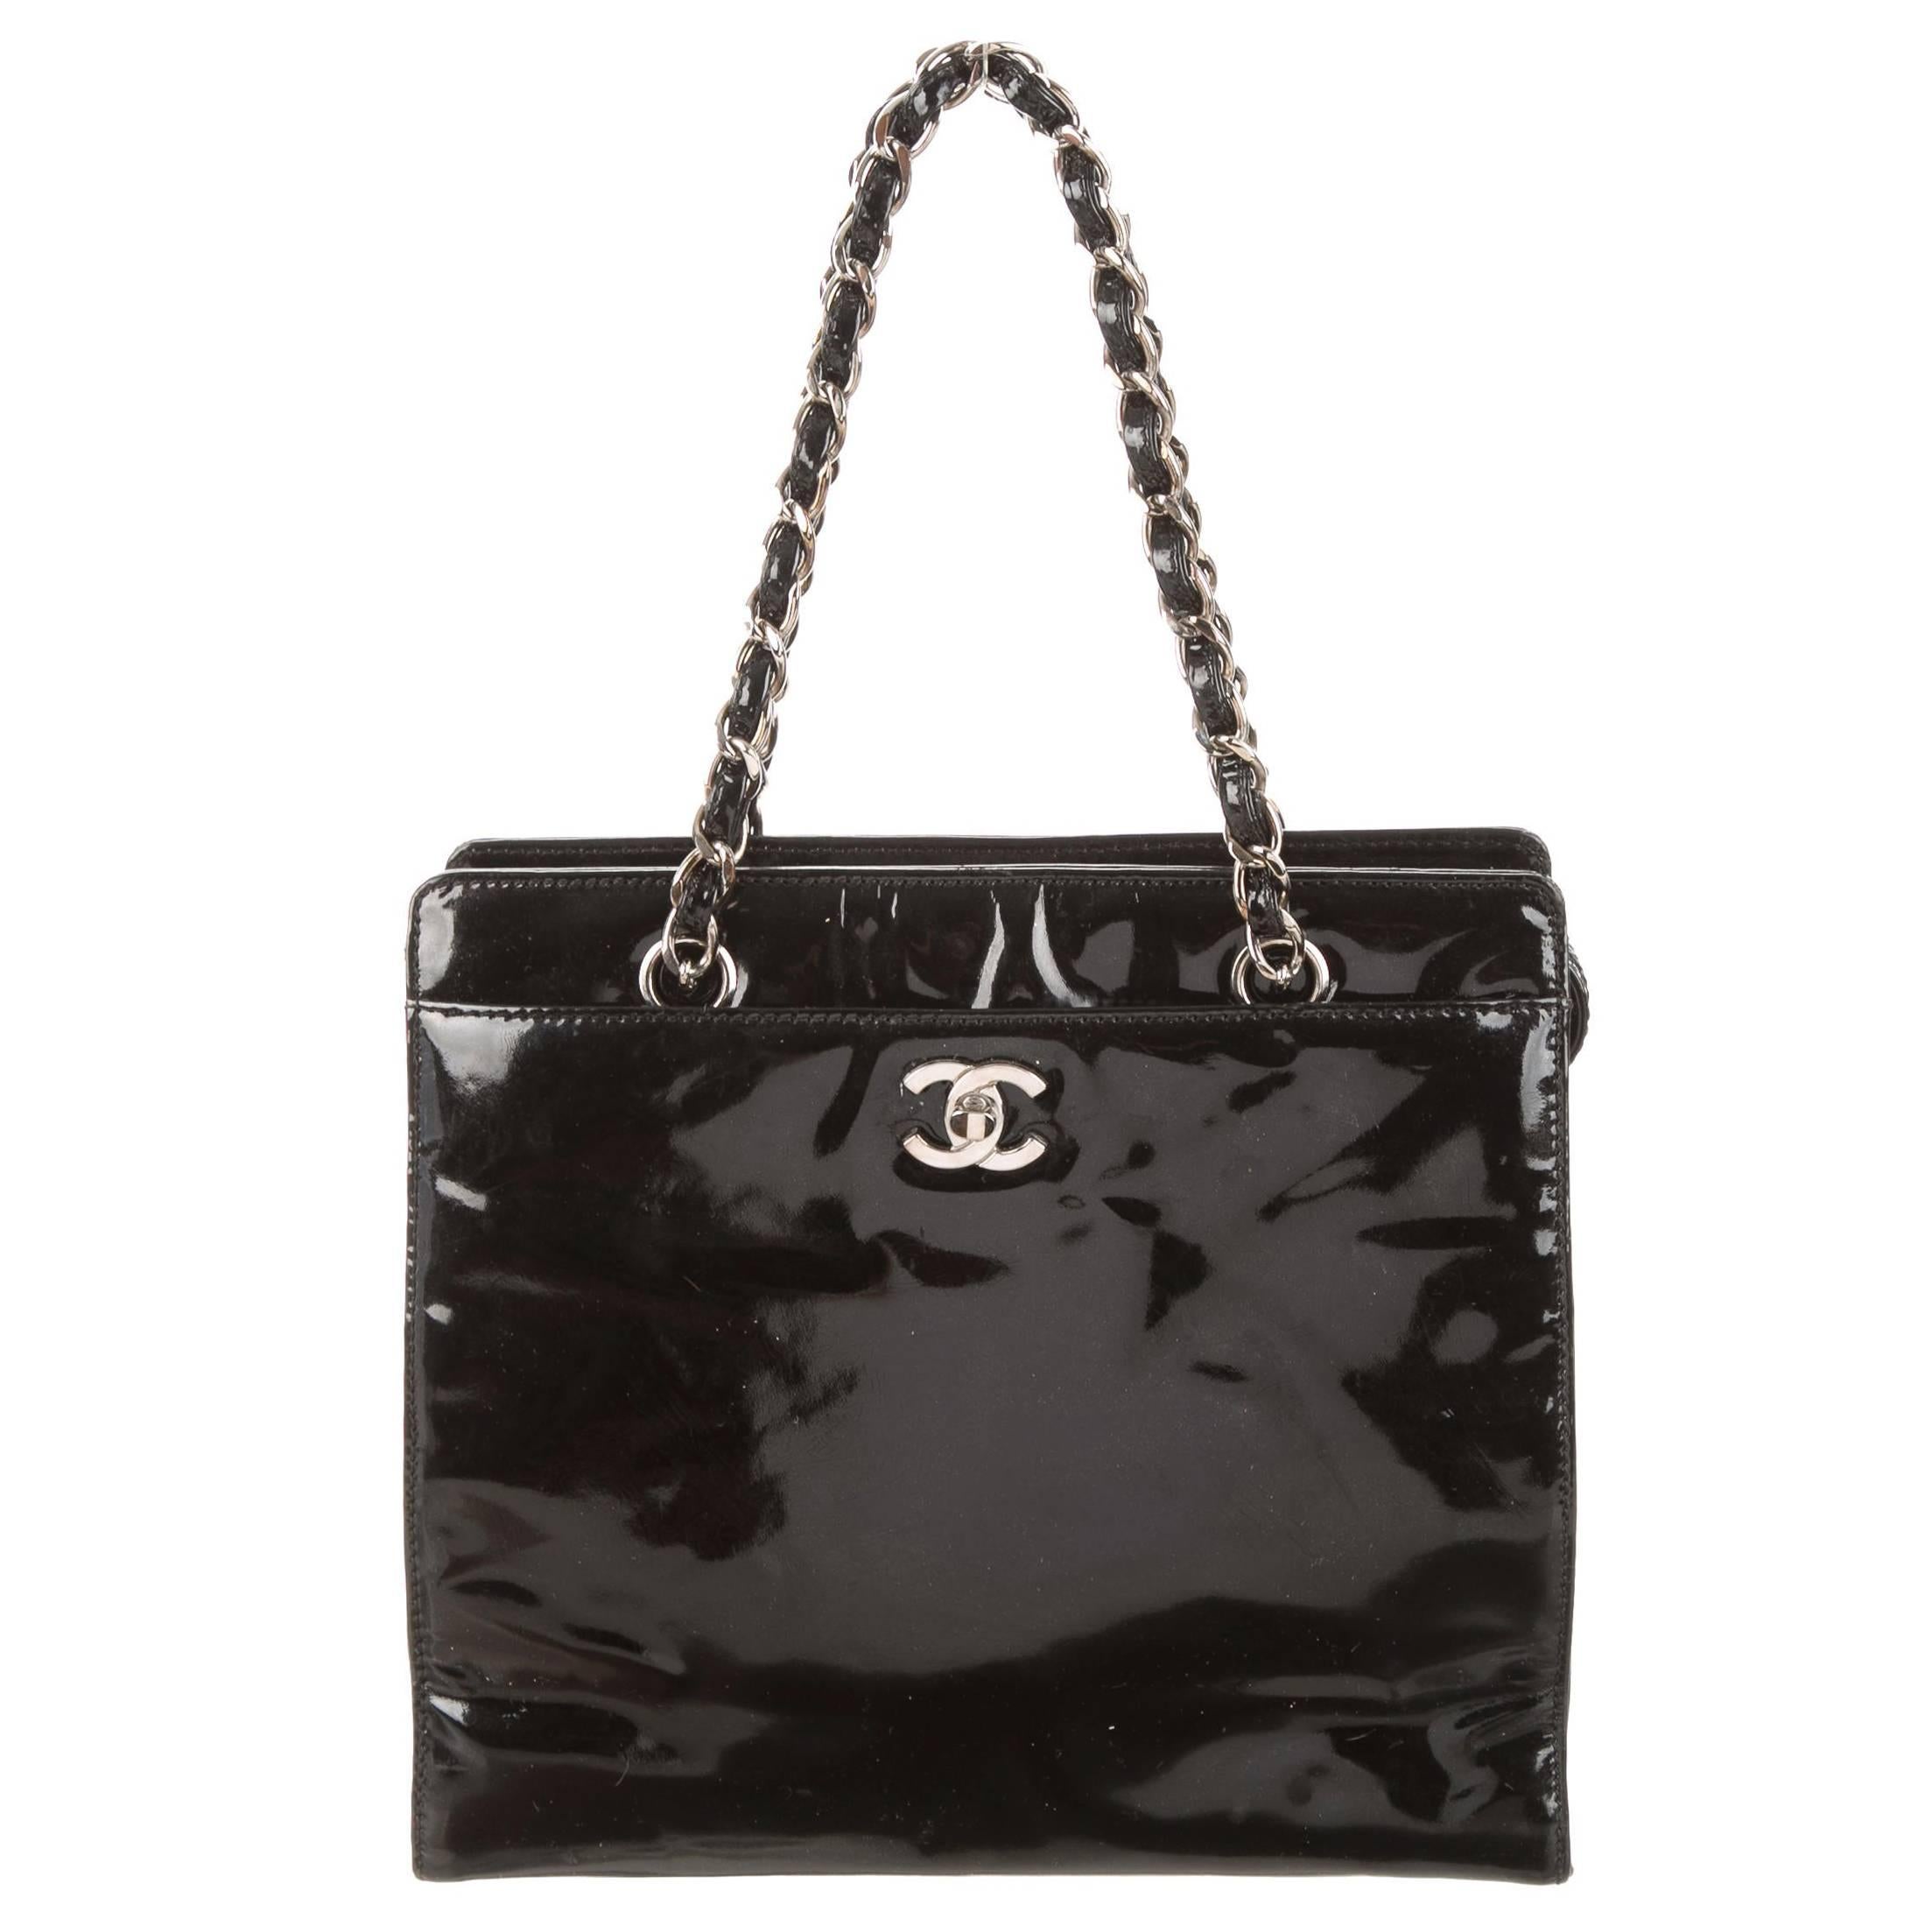 Chanel Black Patent Leather Small Shopper Evening Top Handle Bag